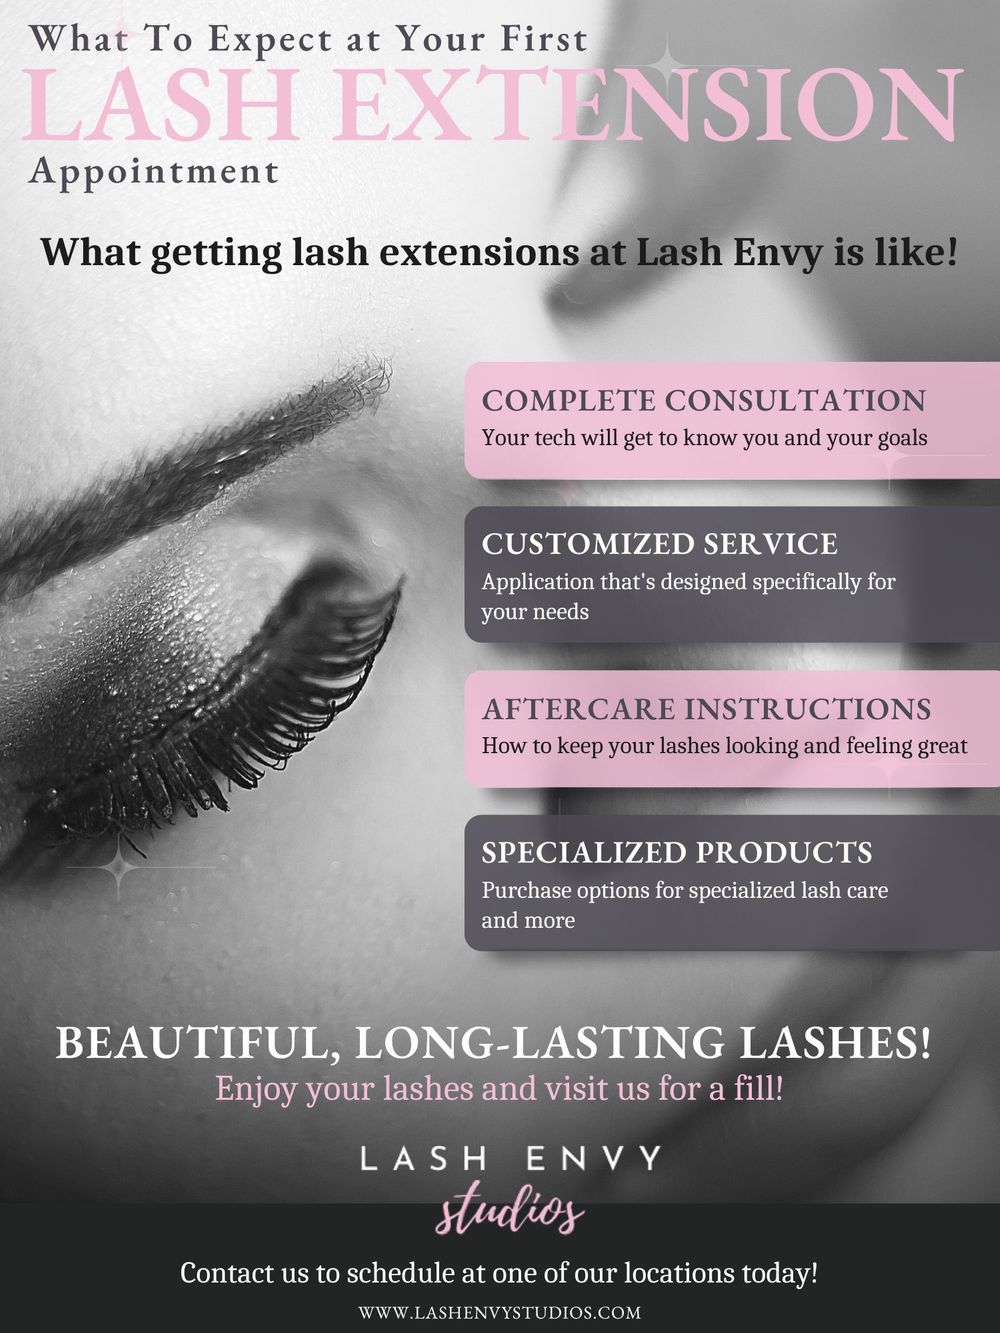 Infographic - What To Expect at Your First Lash Extension Appointment.jpg